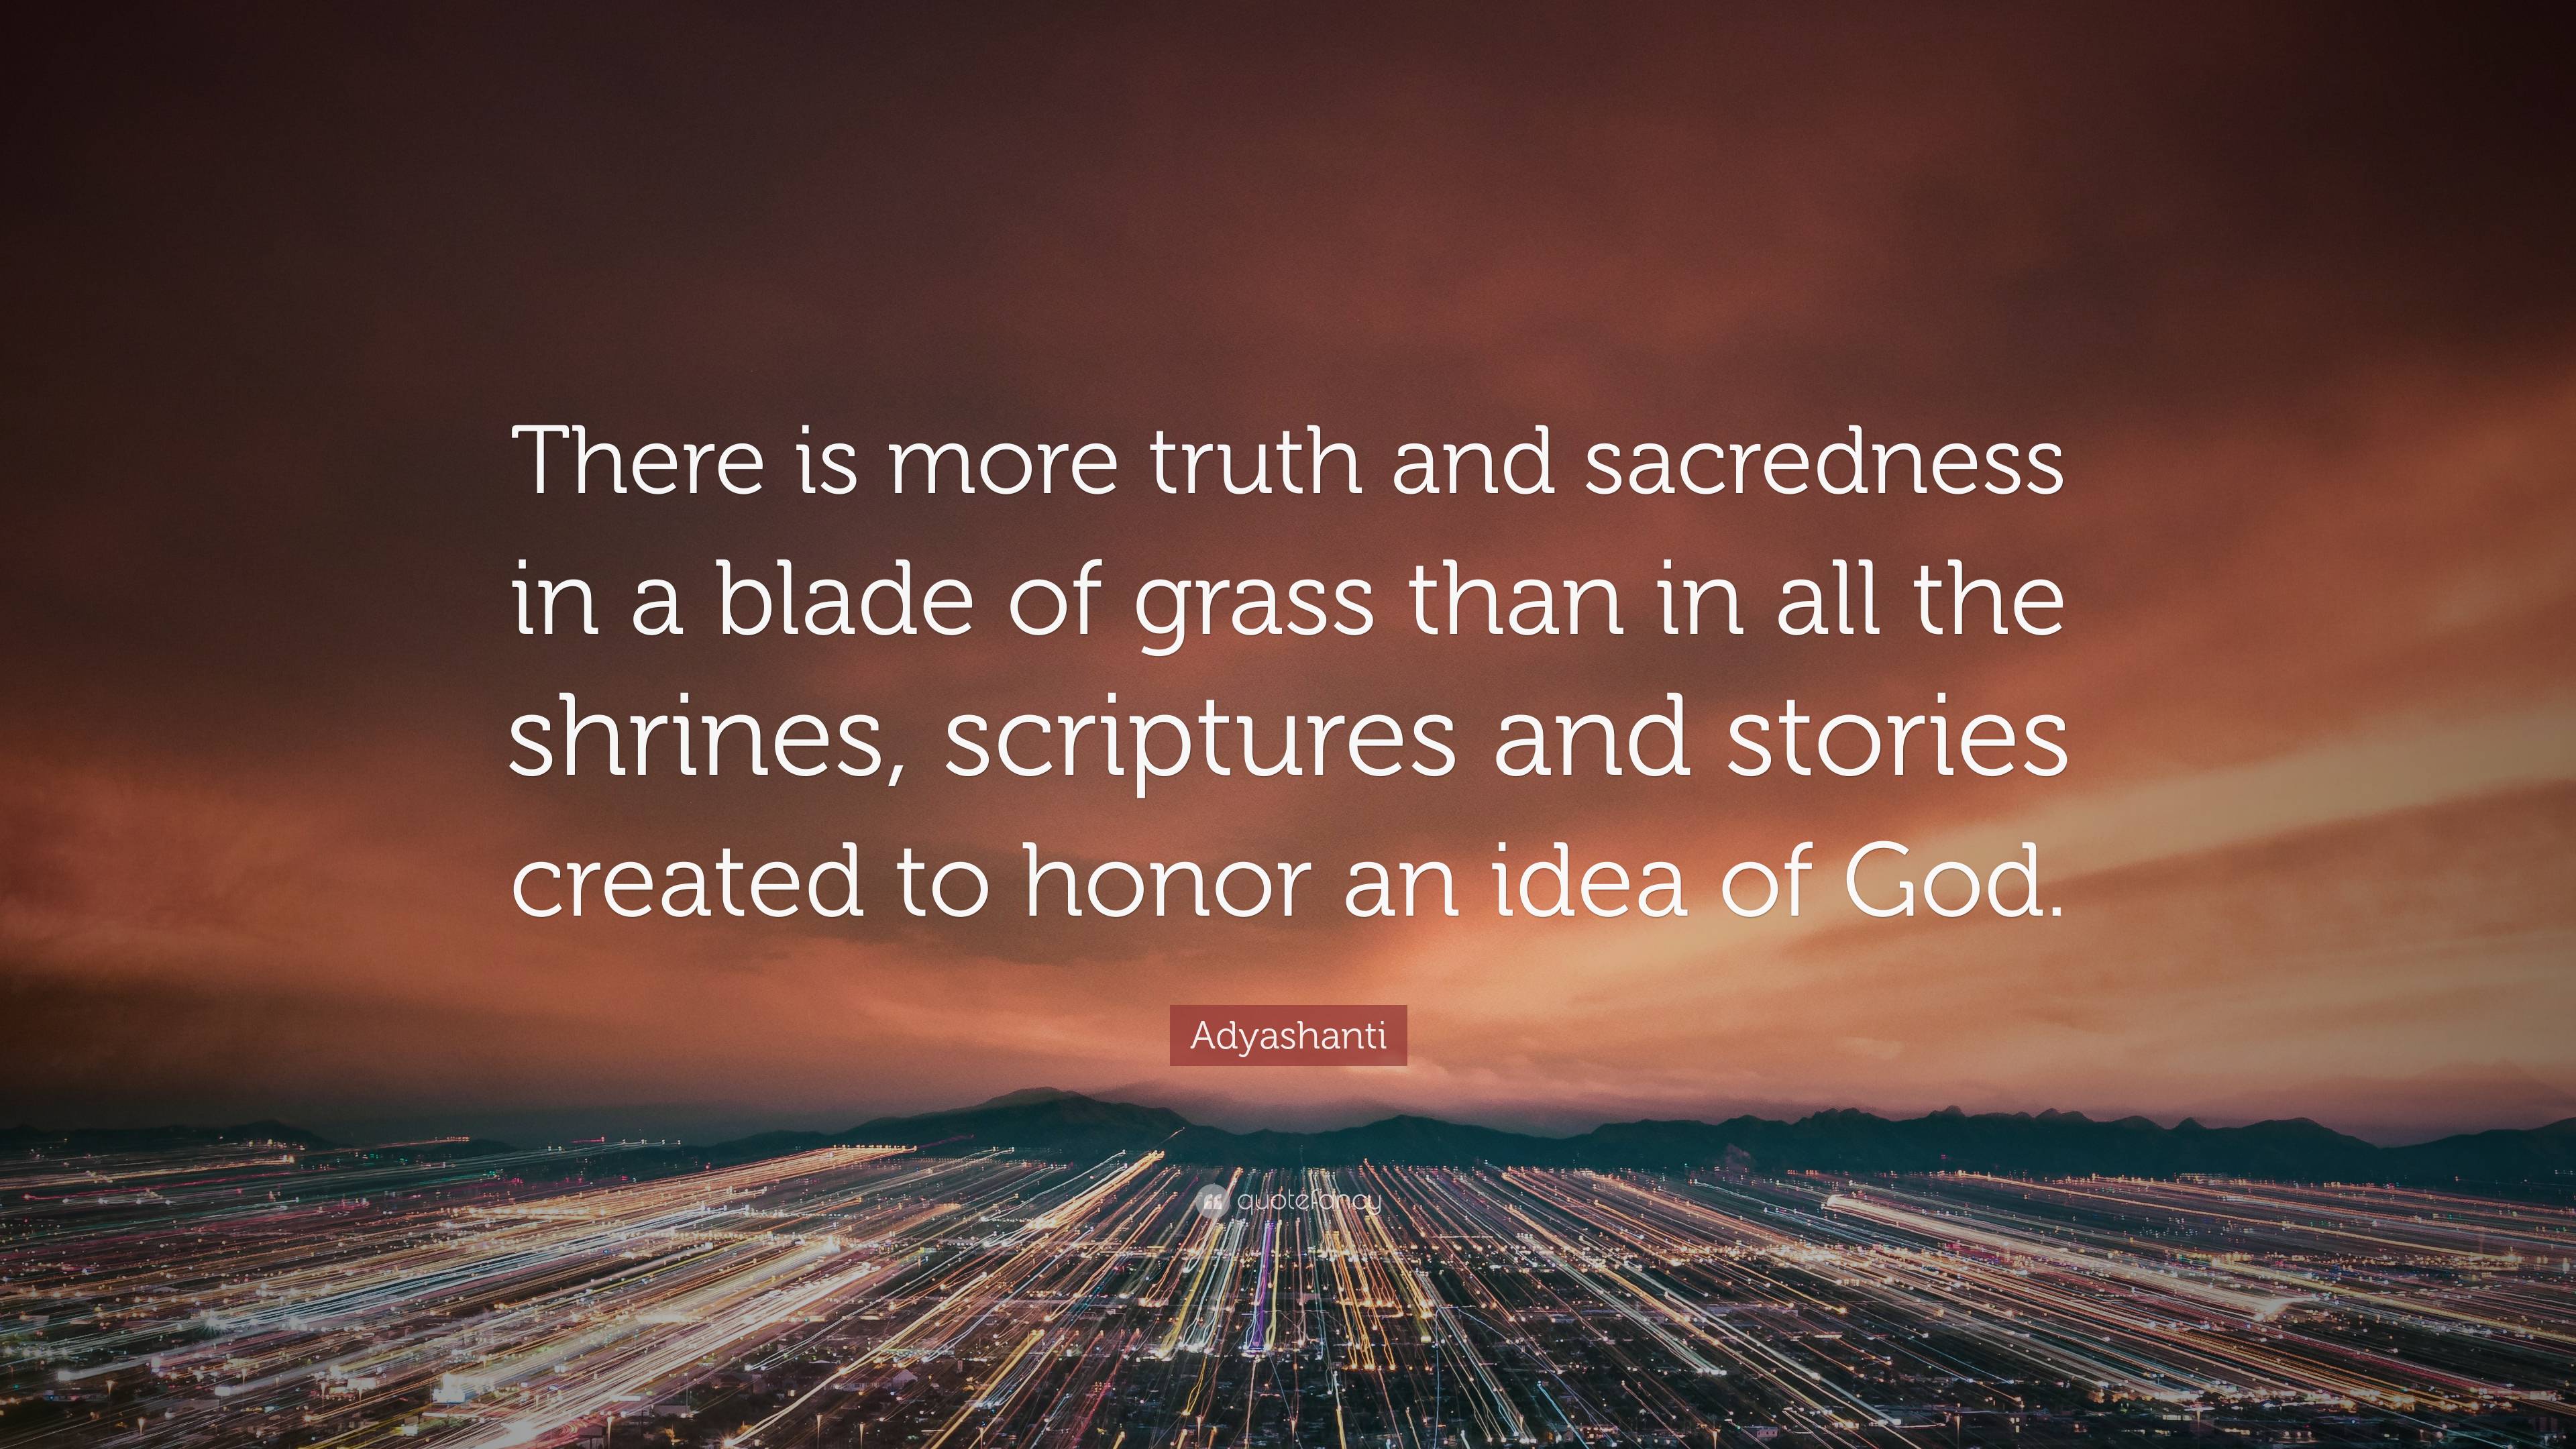 6861036-Adyashanti-Quote-There-is-more-truth-and-sacredness-in-a-blade-of.jpg